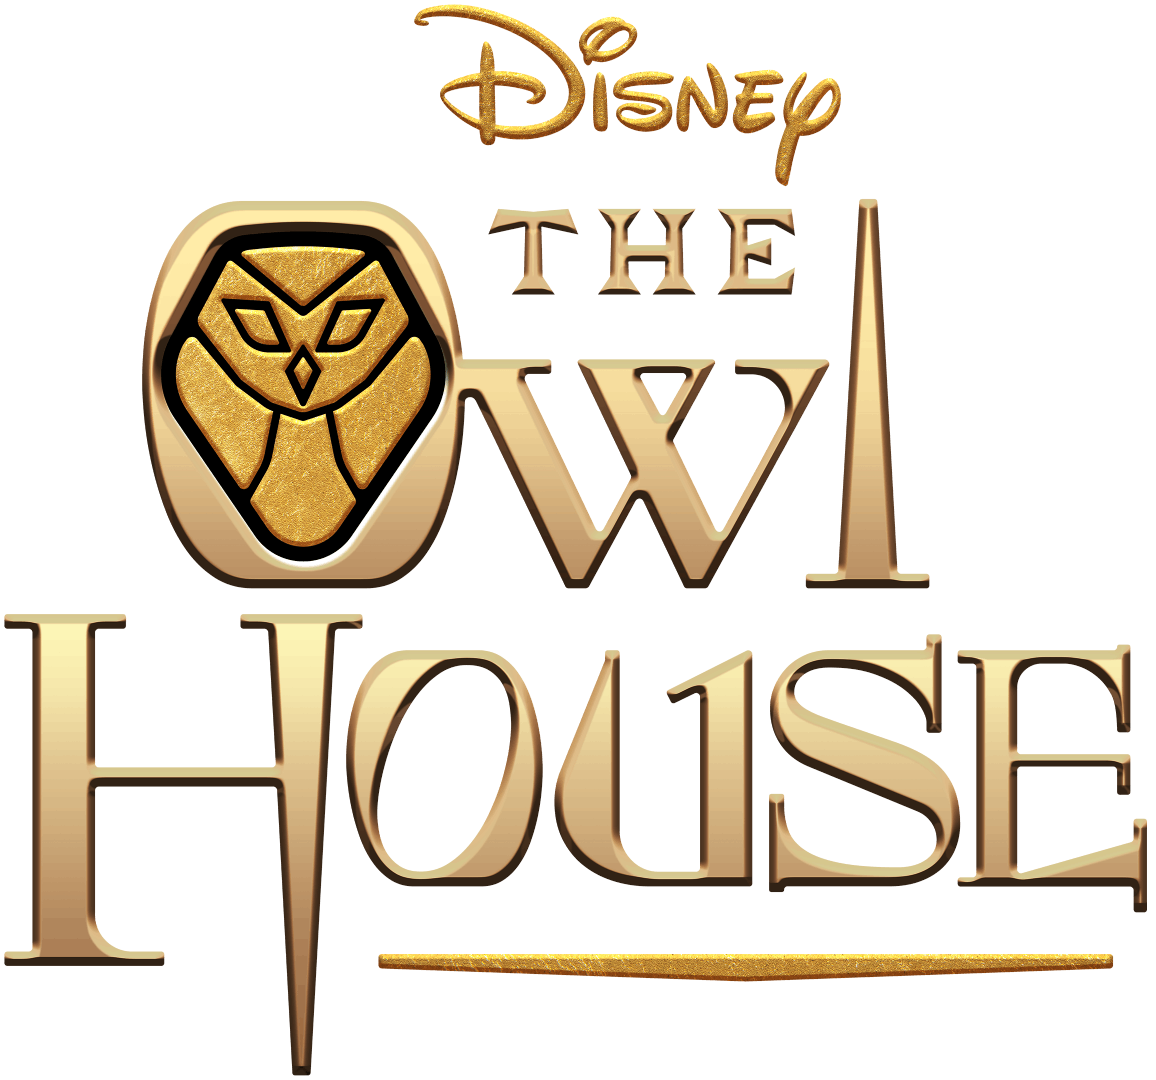 The logo for The Owl House.